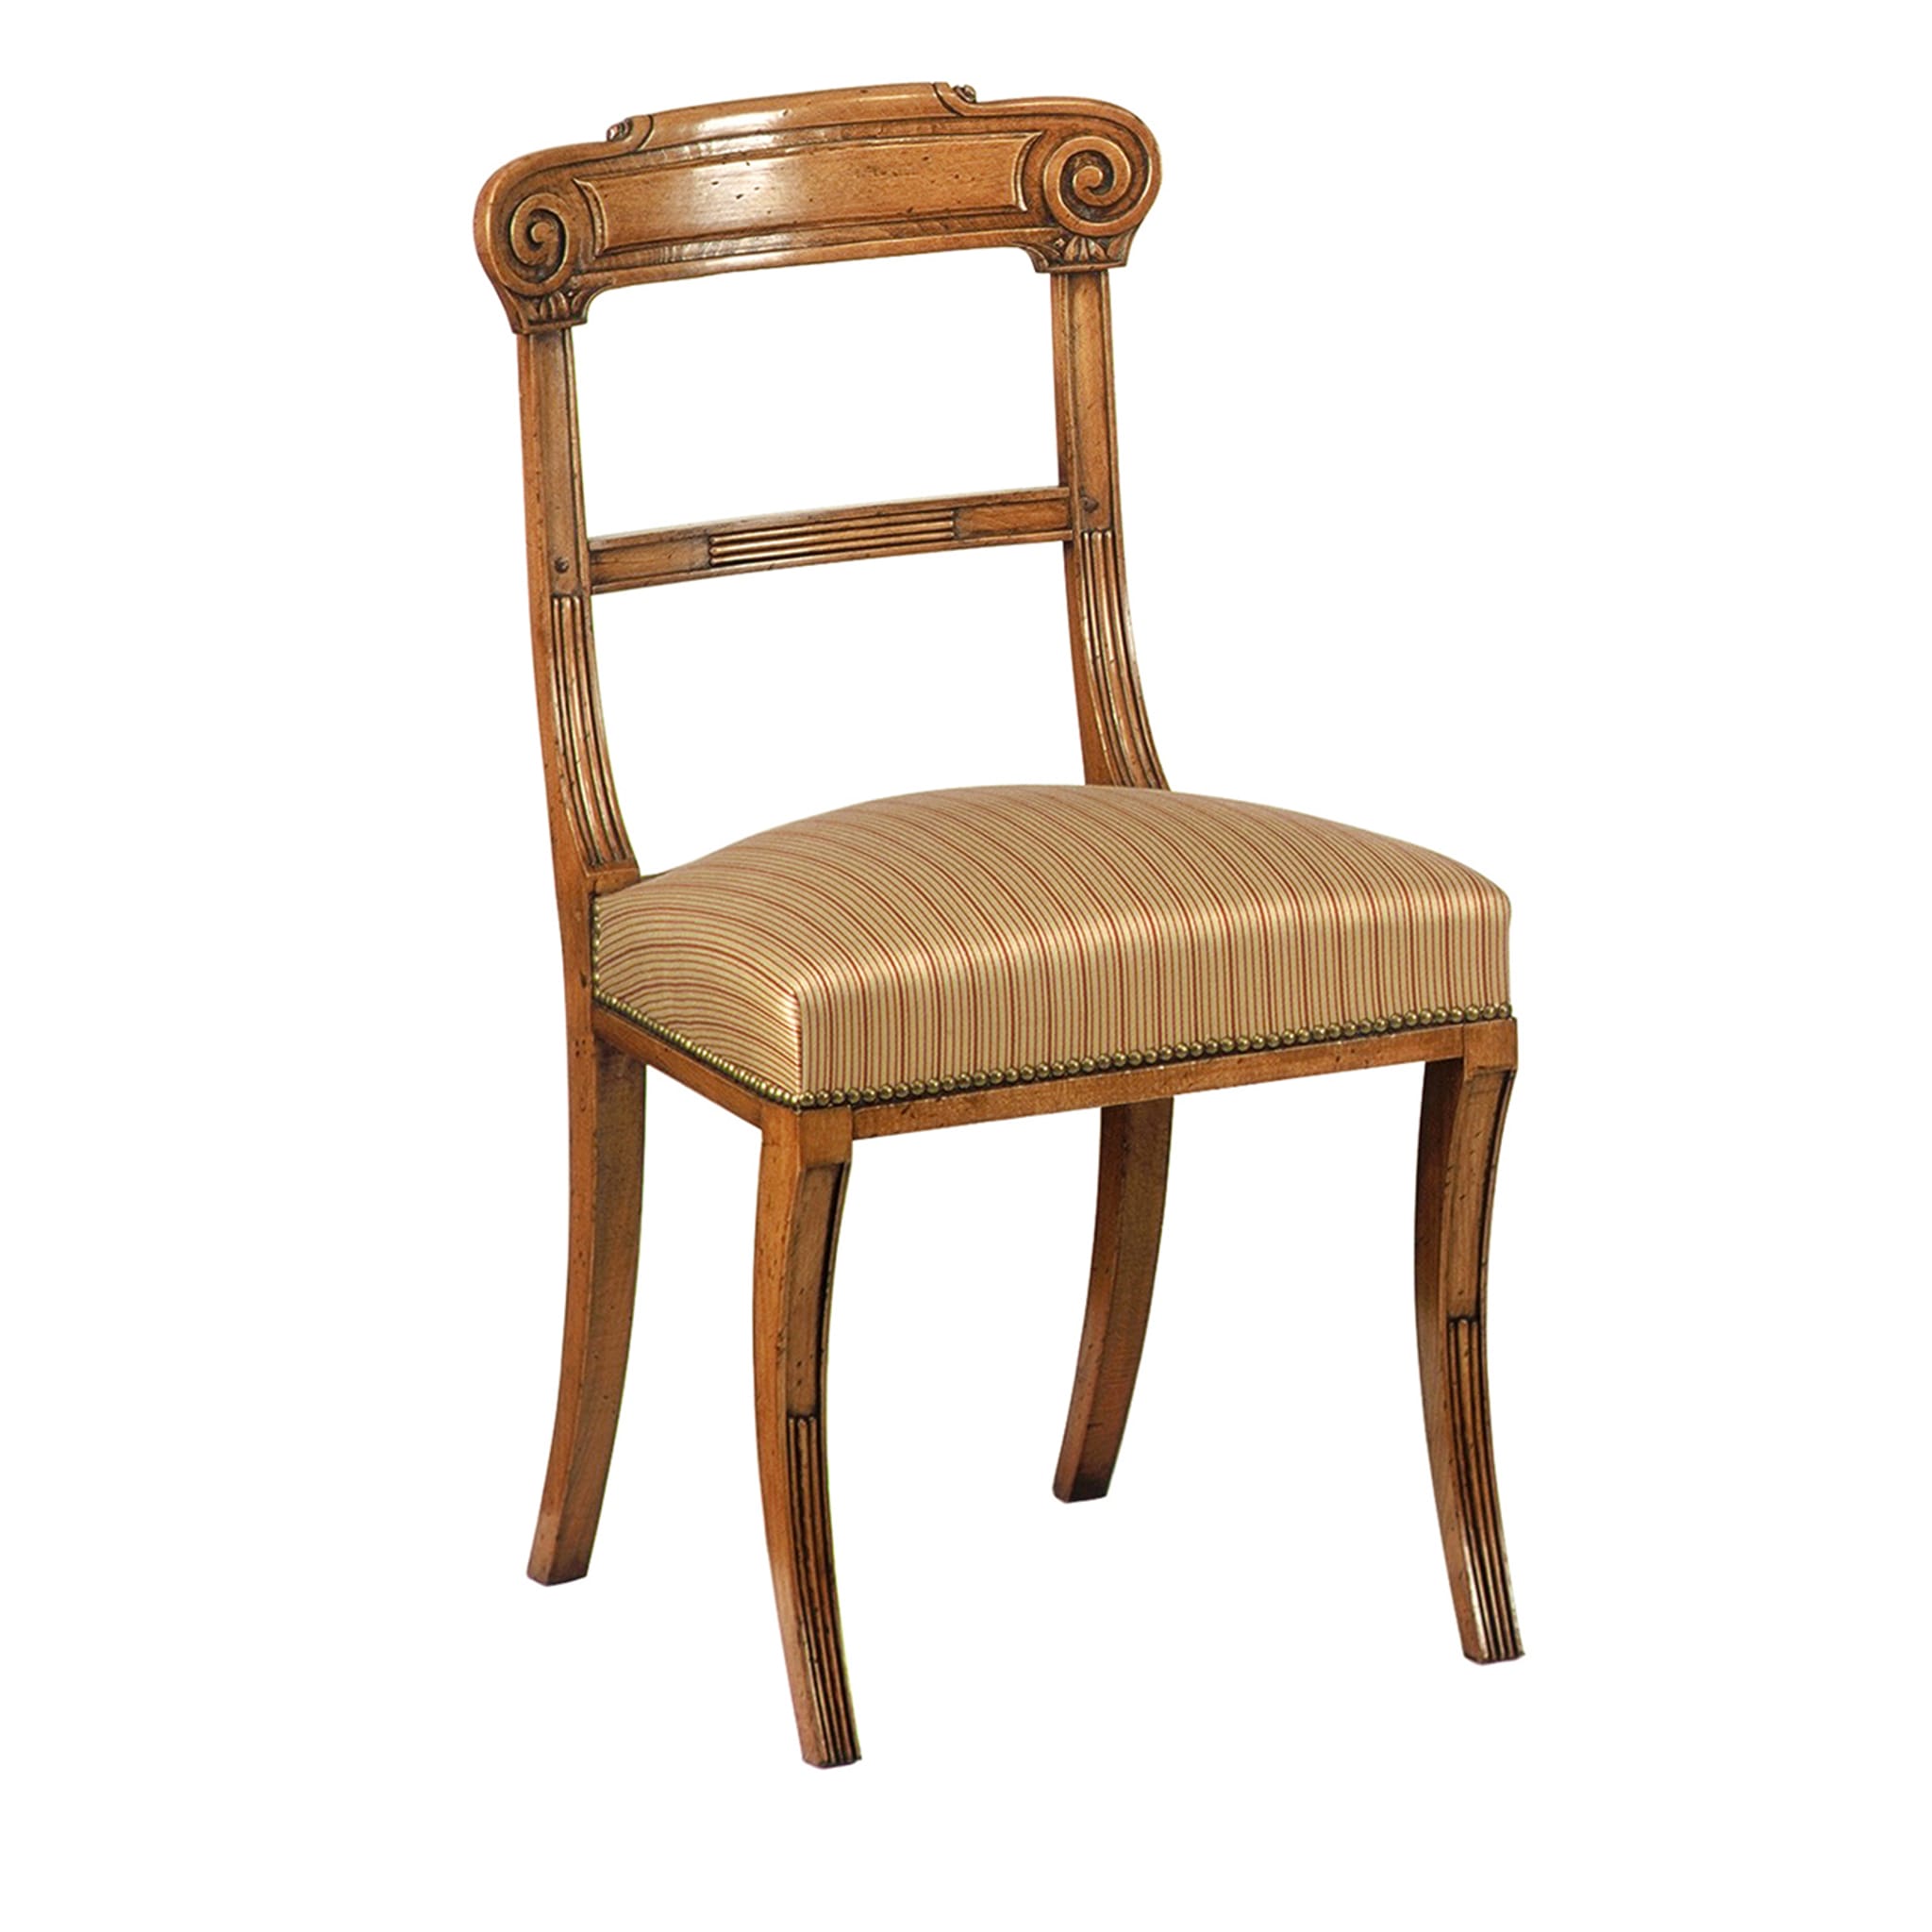 Victorian-Style Beech Chair - Main view